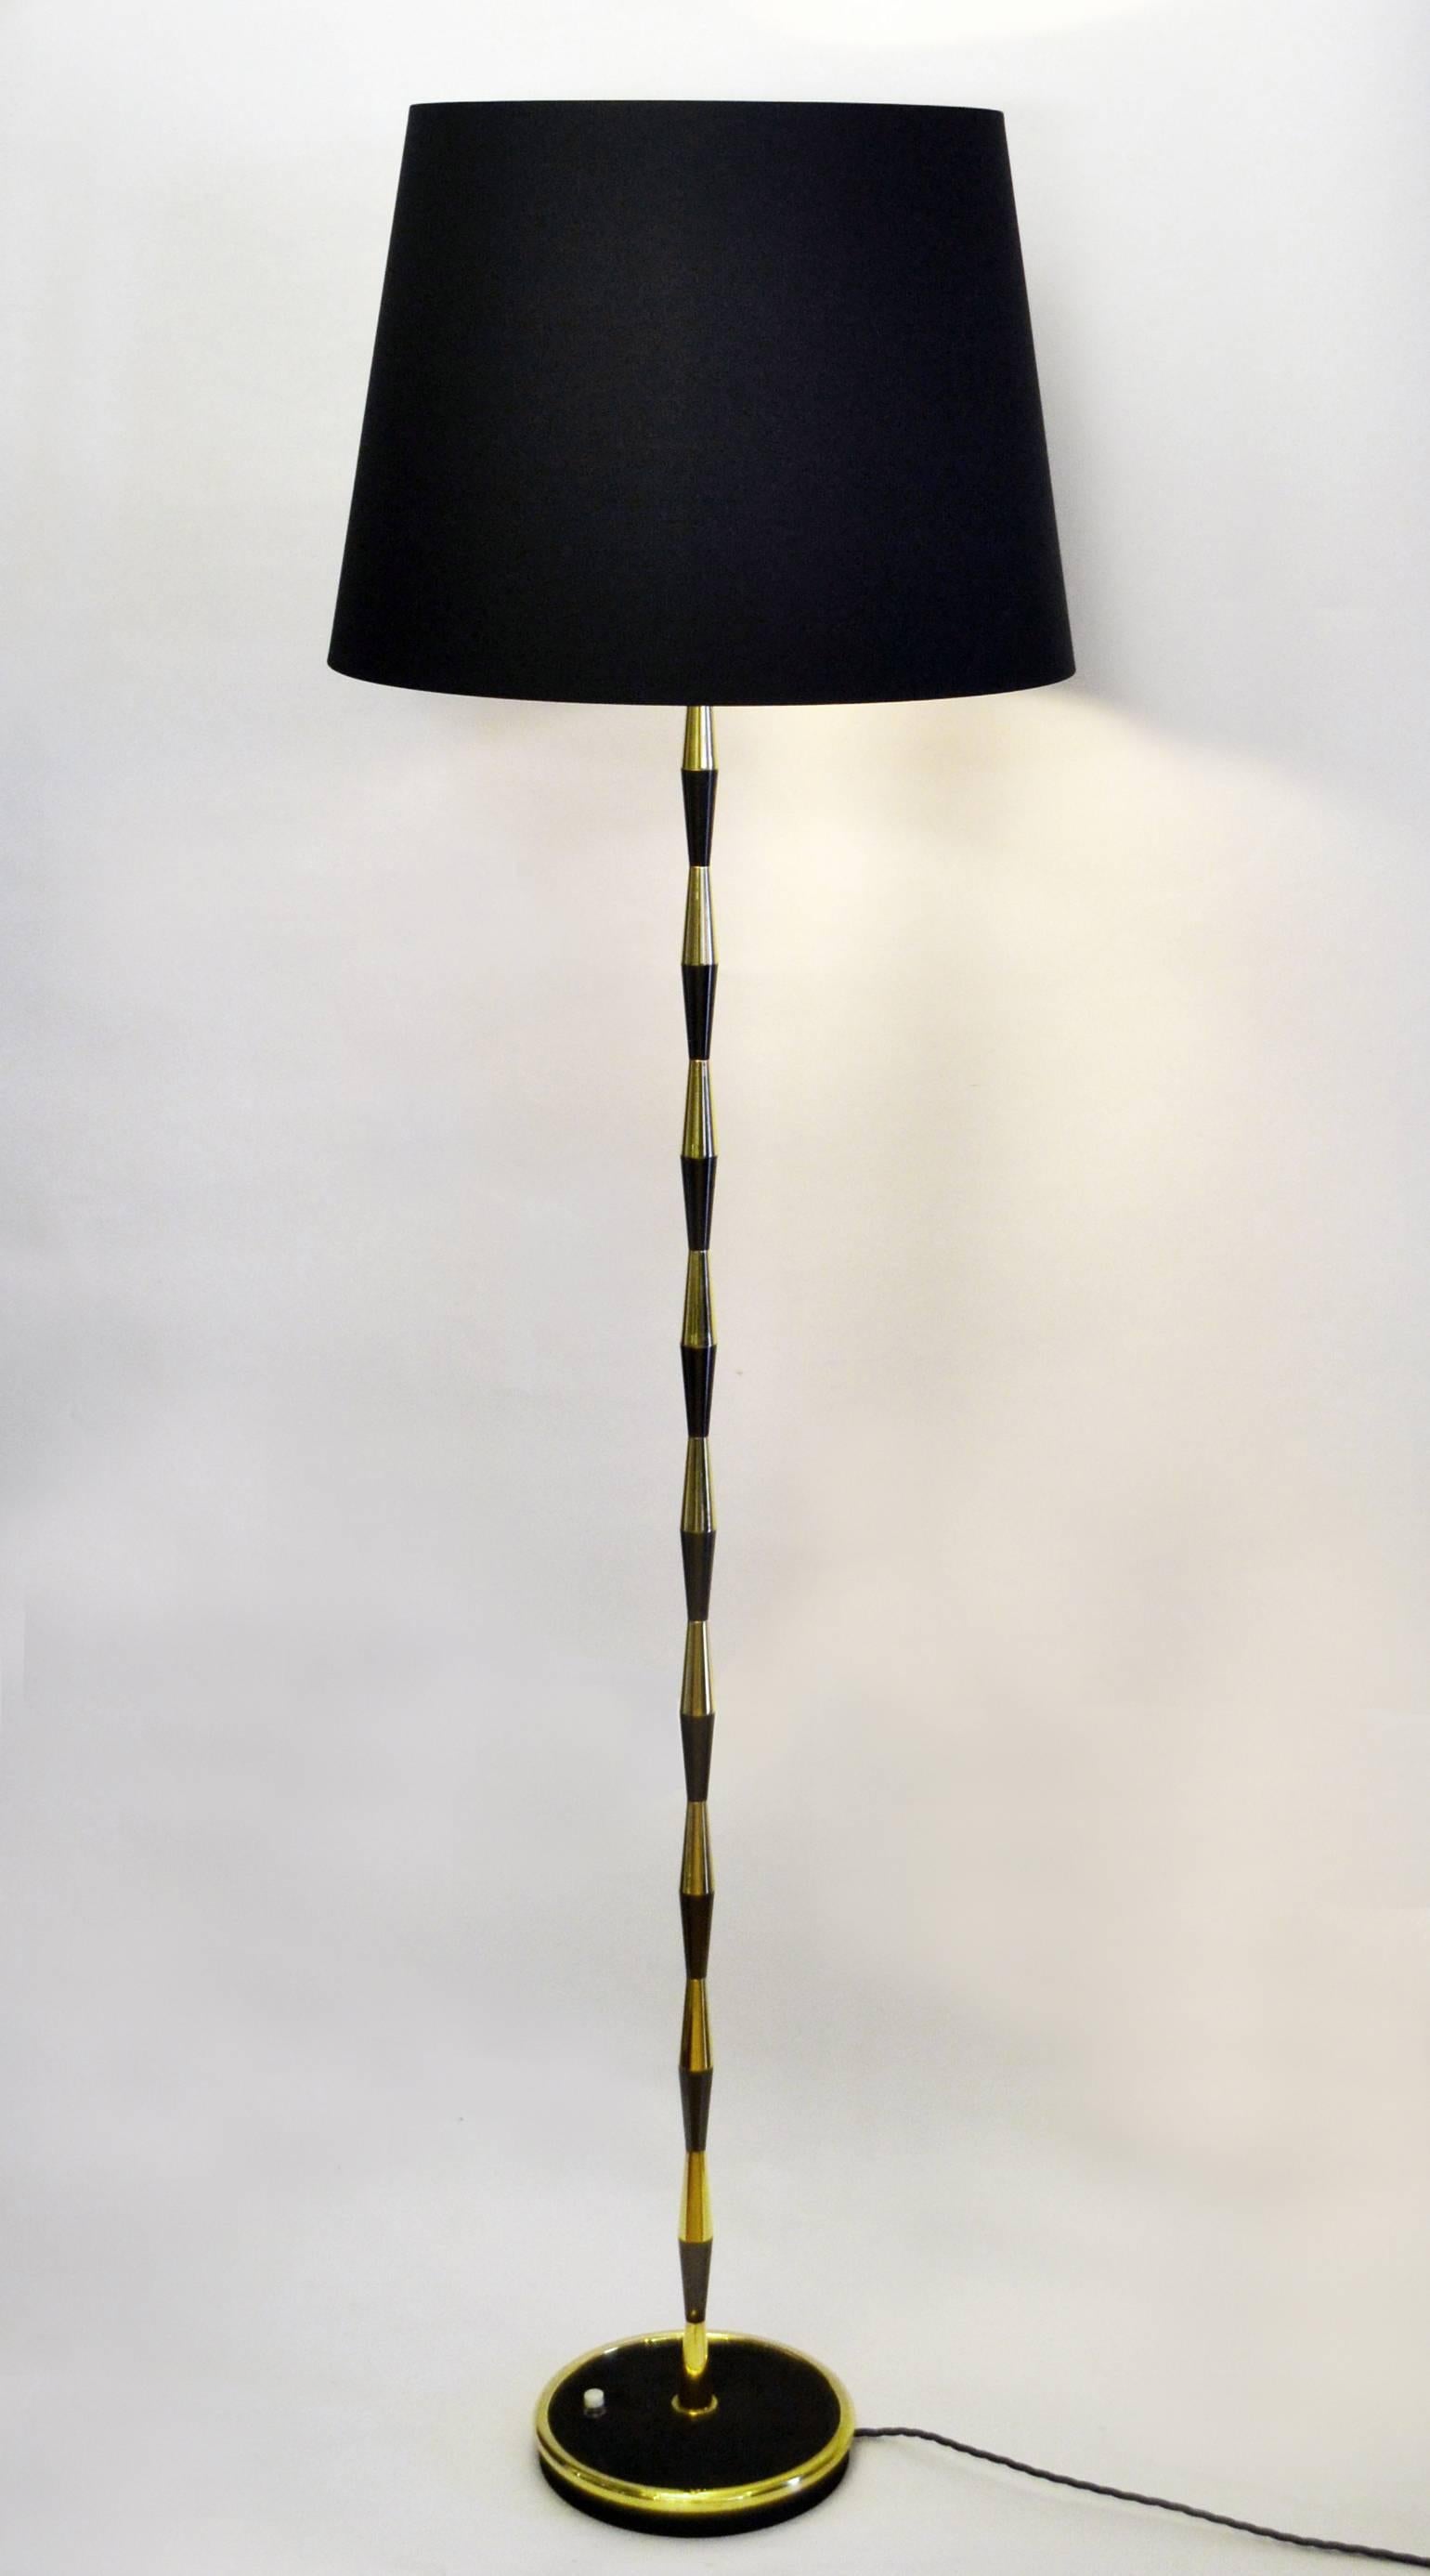 Brass floor lamp in the style of Maison Lunel / Arlus with a stem in alternate brass and black beads and black base with a brass rim has a new lampshade.